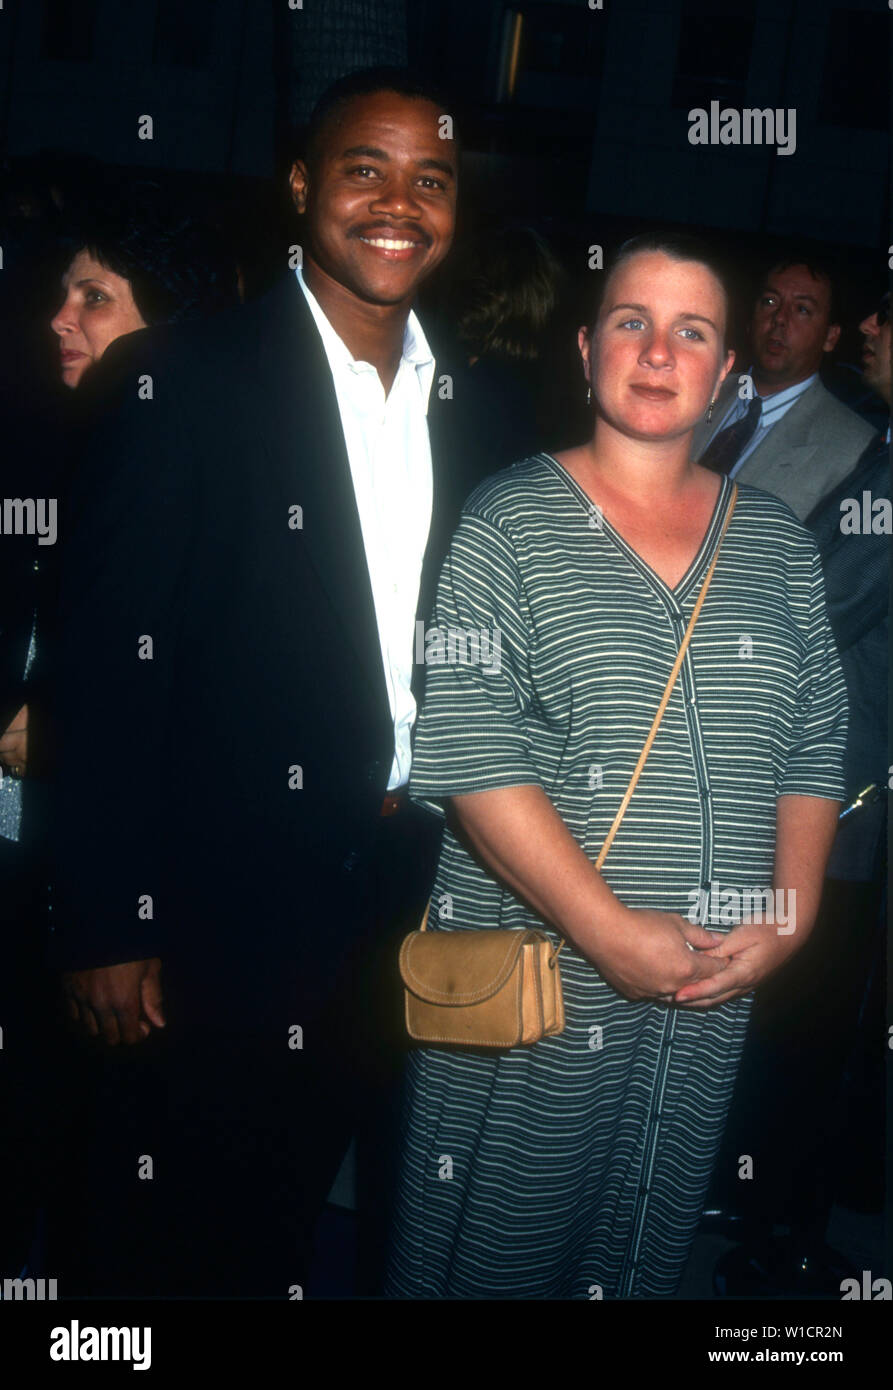 Beverly Hills, California, USA 28th July 1994 Actor Cuba Gooding Jr. and wife Sara Kapfer attend New Line Cinema's 'The Mask' Premiere on July 28, 1994 at The Academy Theatre in Beverly Hills, California, USA. Photo by Barry King/Alamy Stock Photo Stock Photo